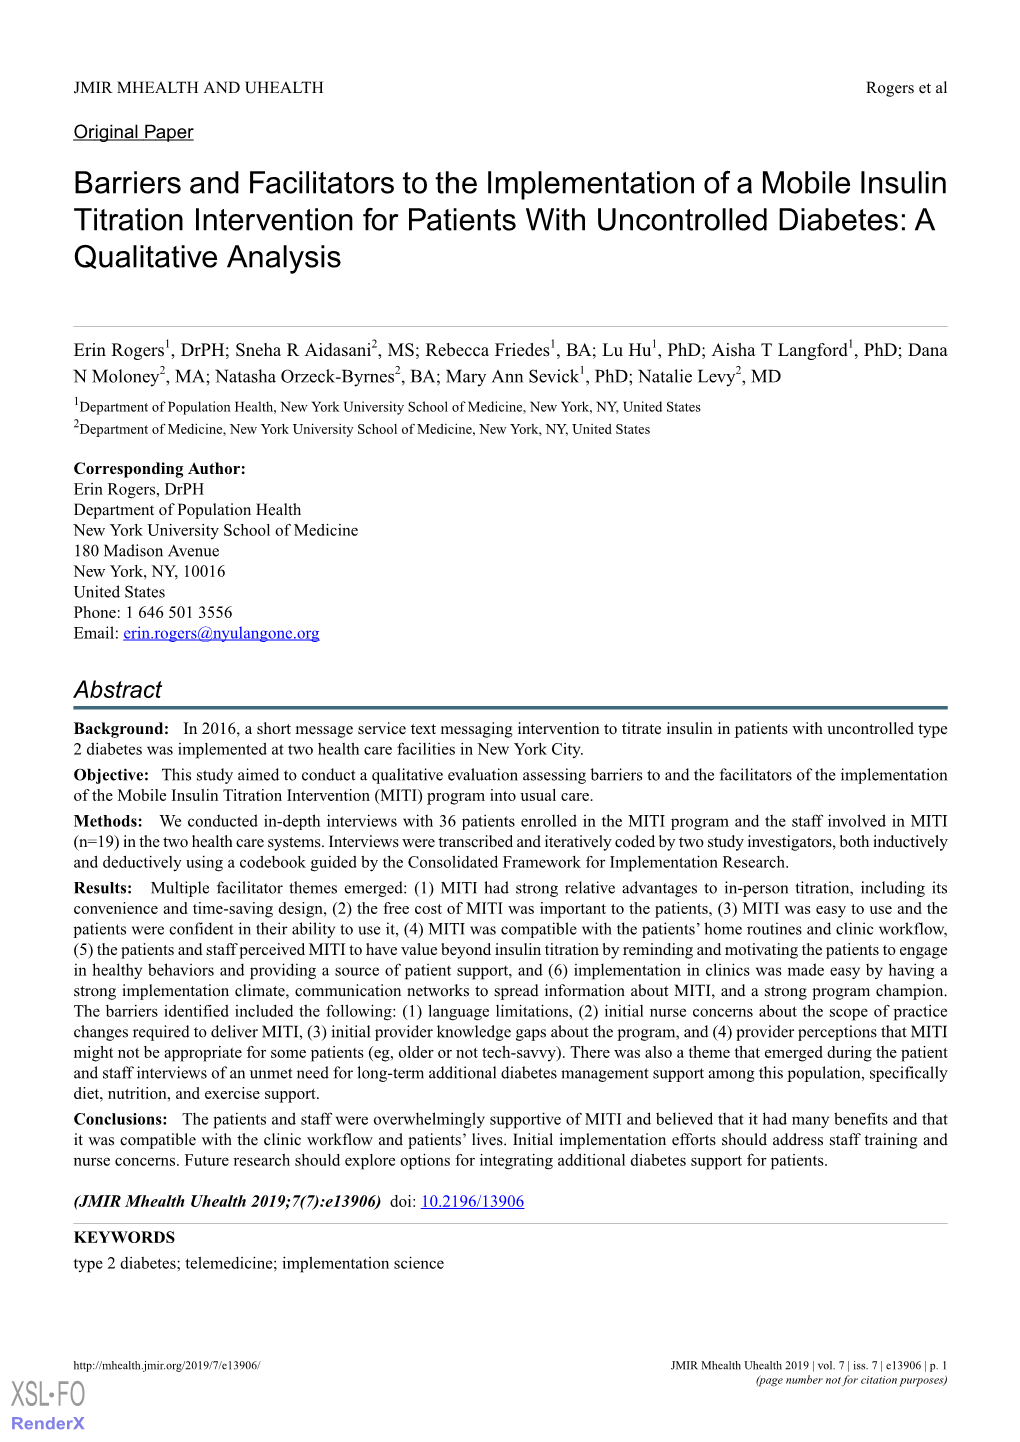 Barriers and Facilitators to the Implementation of a Mobile Insulin Titration Intervention for Patients with Uncontrolled Diabetes: a Qualitative Analysis